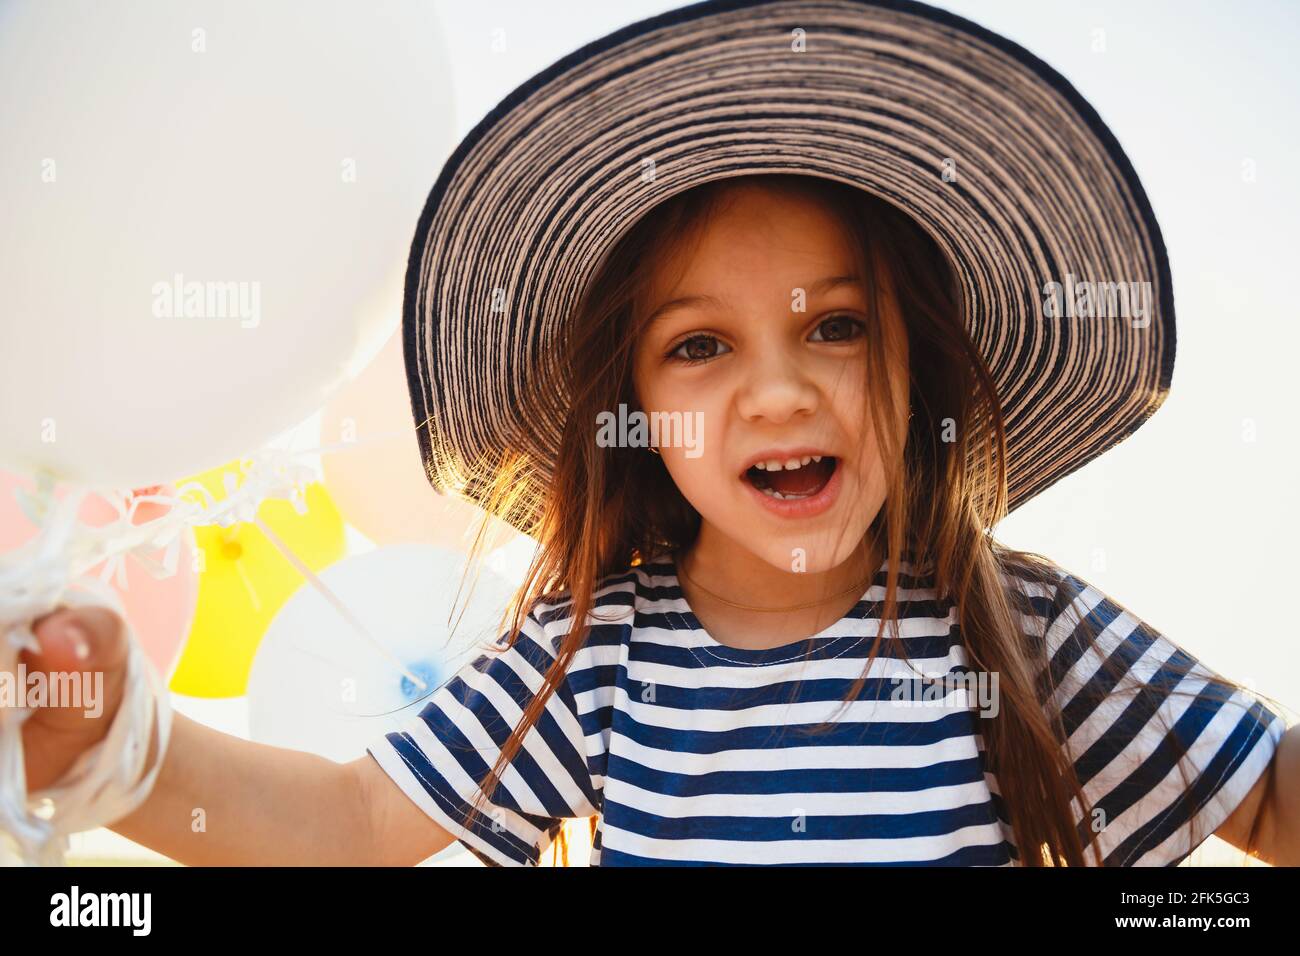 Close up fun portrait of cute laughing little girl holding colorful balloons in striped sunhat and shirt looking at camera Stock Photo